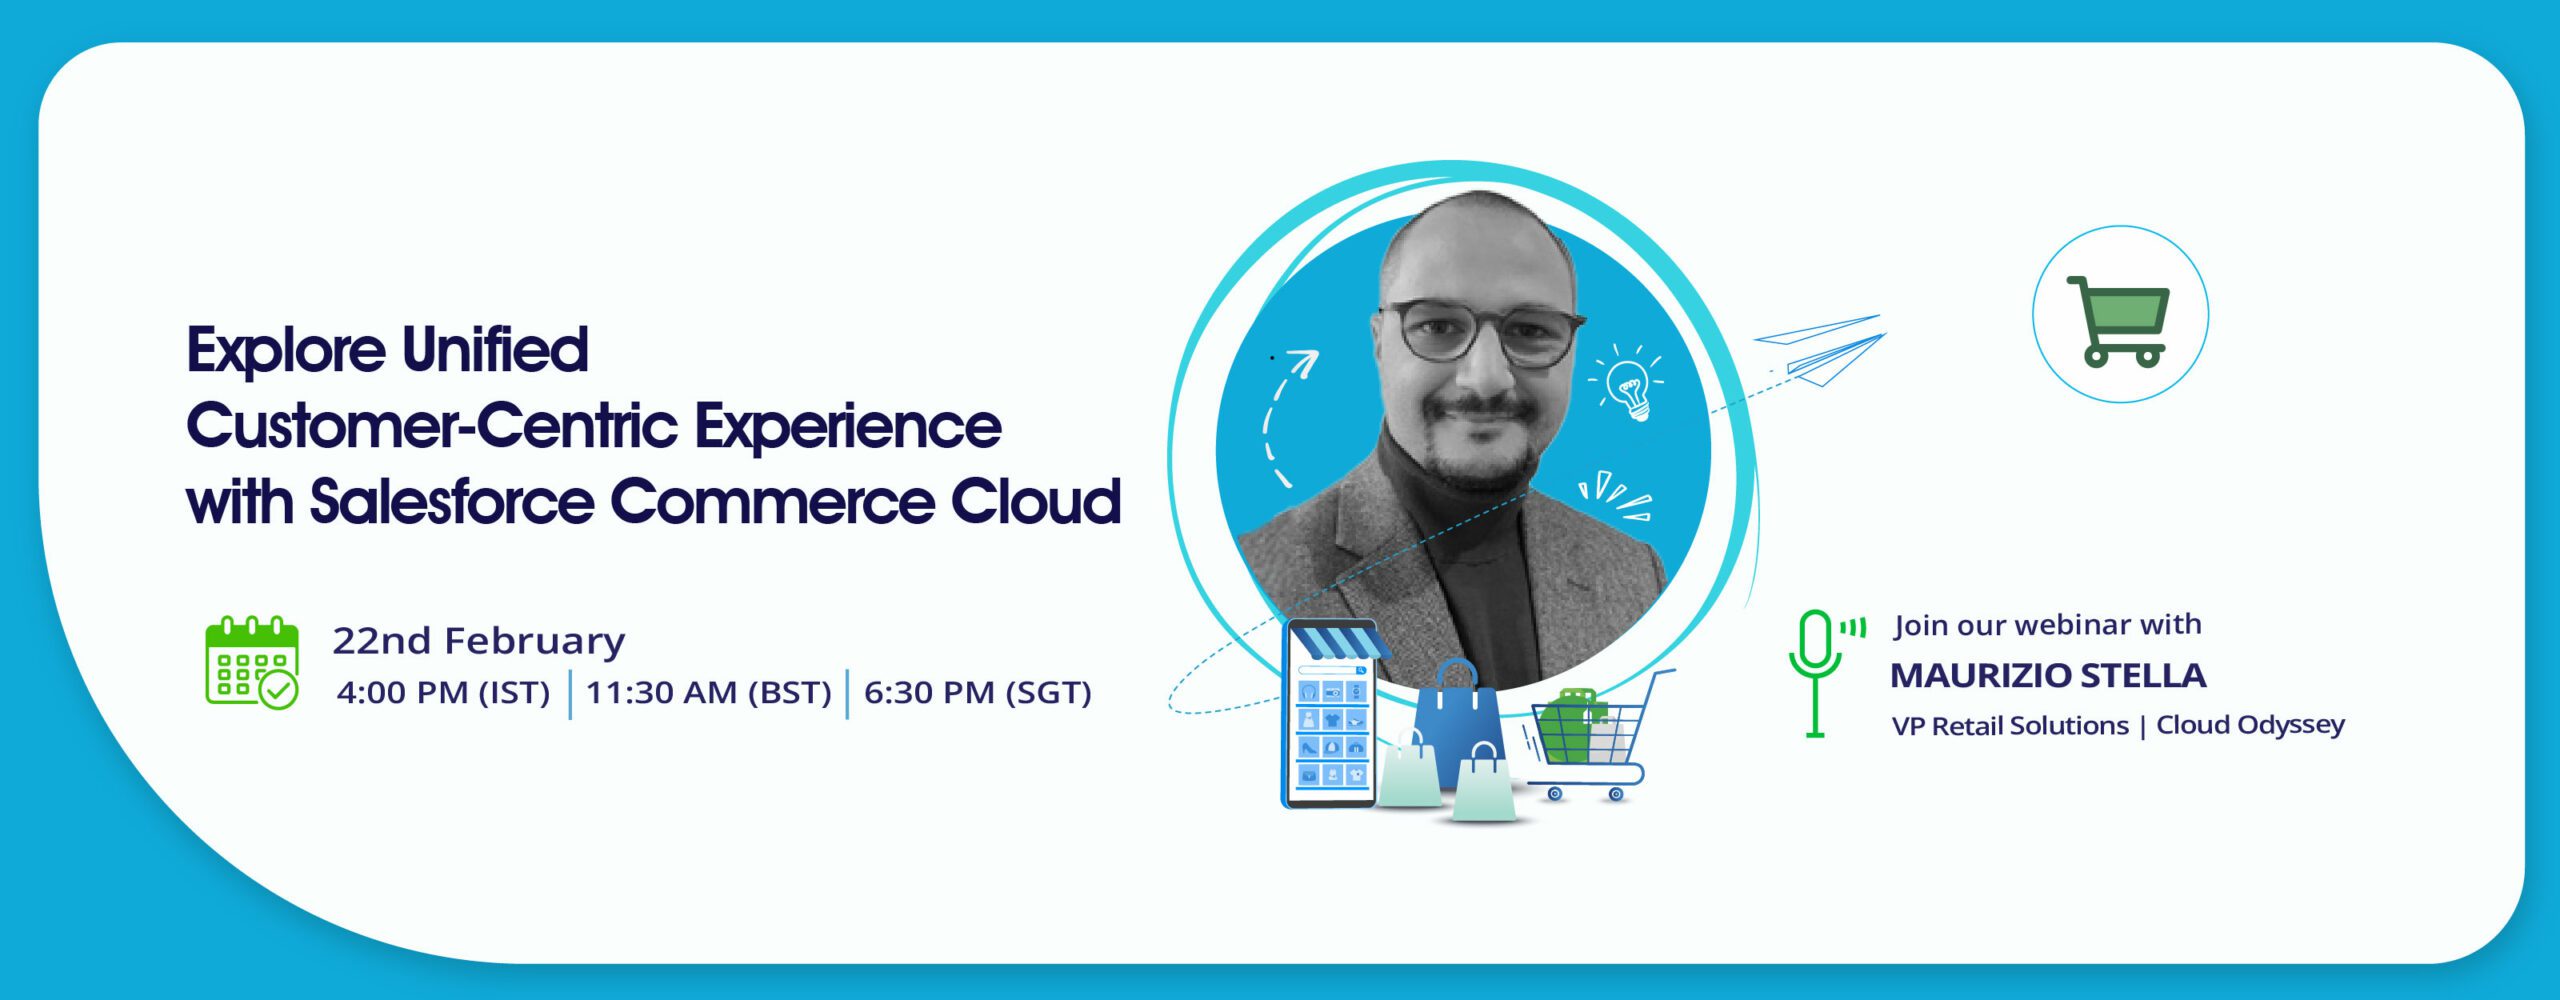 Explore Unified Customer-Centric Experience with Salesforce Commerce Cloud